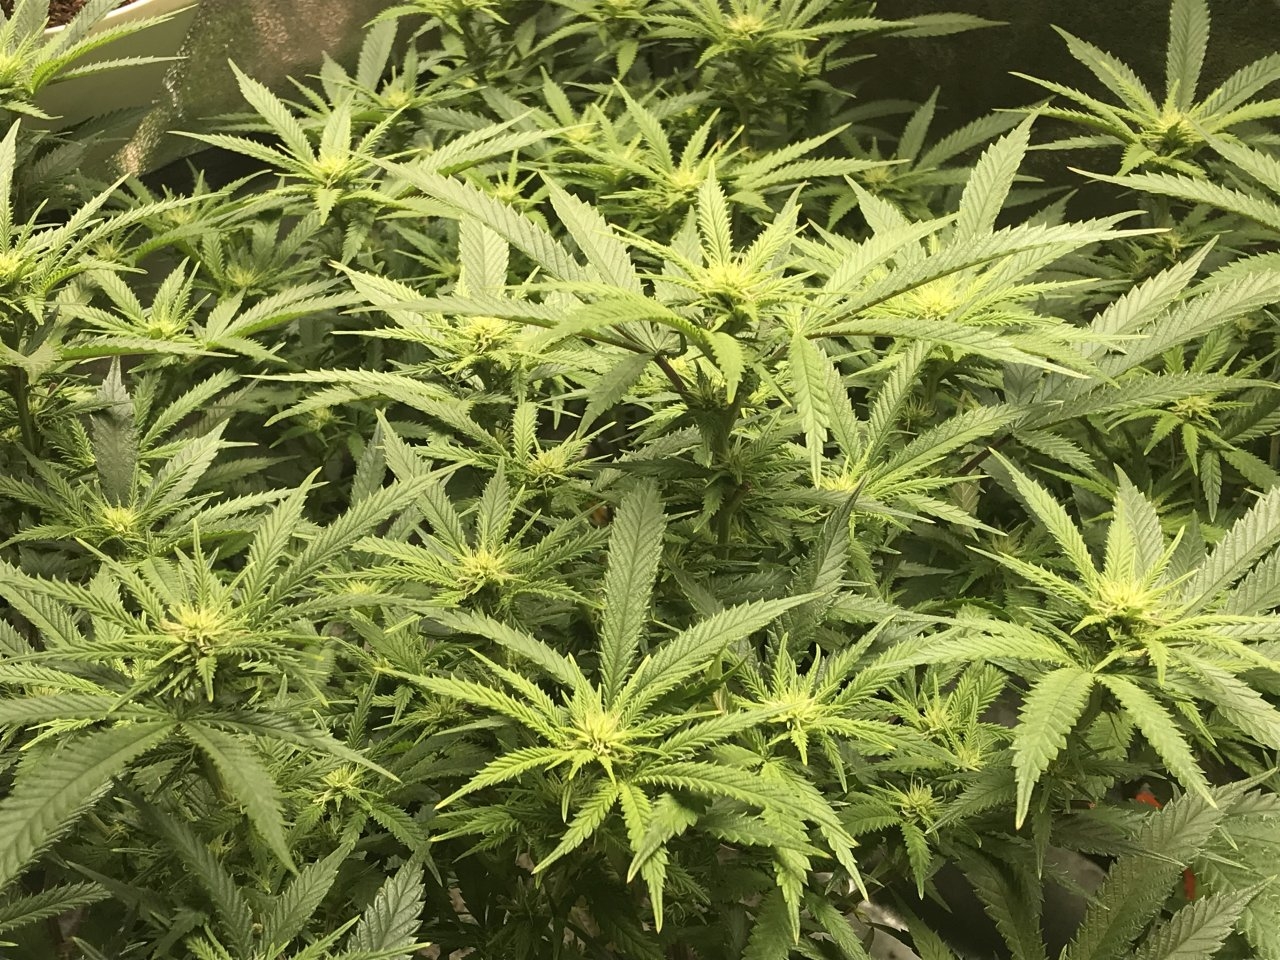 16th Day of 12:12 QuadSide of the Grow 2.JPG